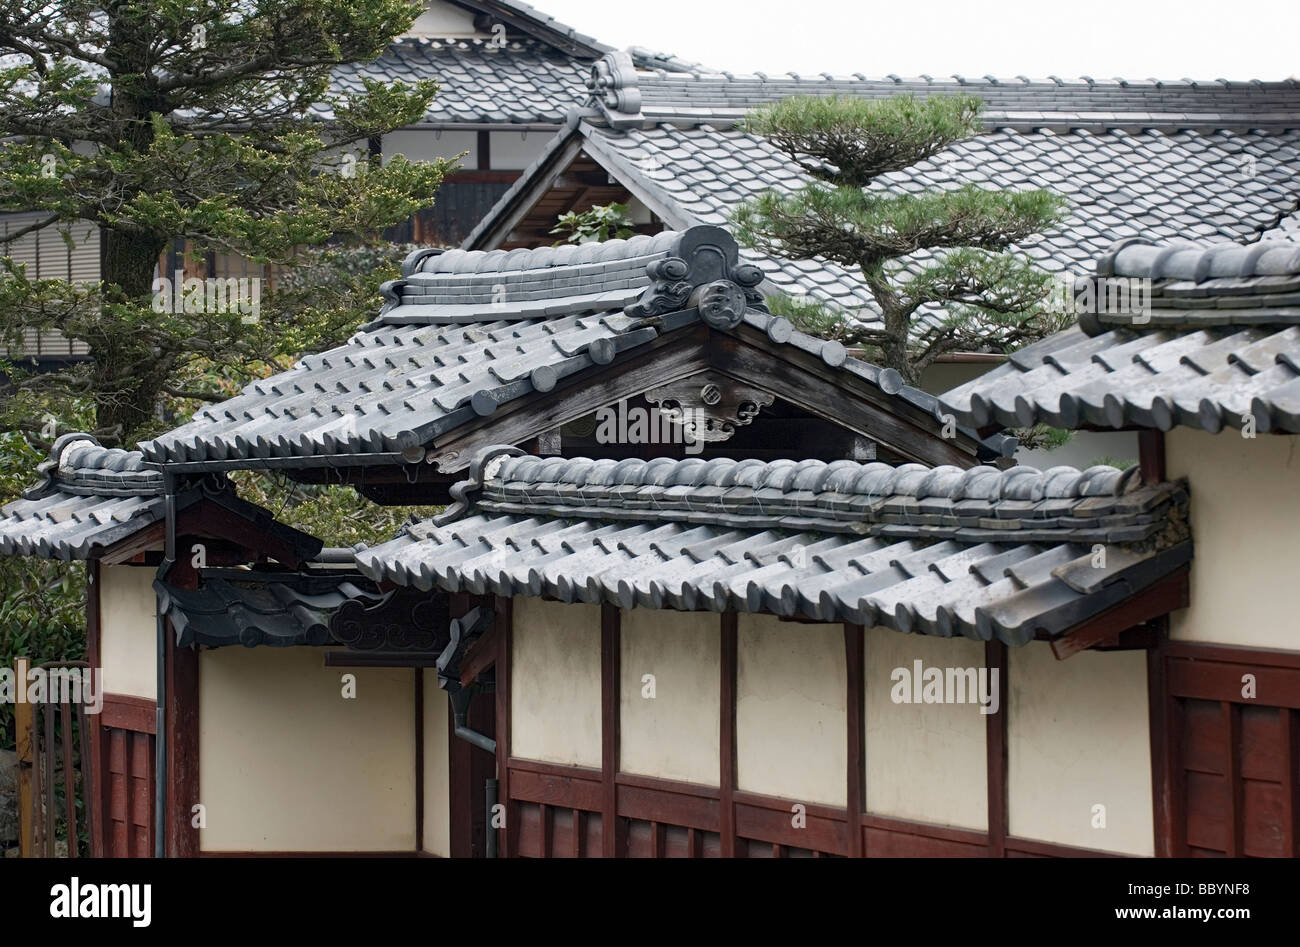 An upscale single family Japanese residence with entry gate multiple roof lines traditional detailing and pine tree in garden Stock Photo